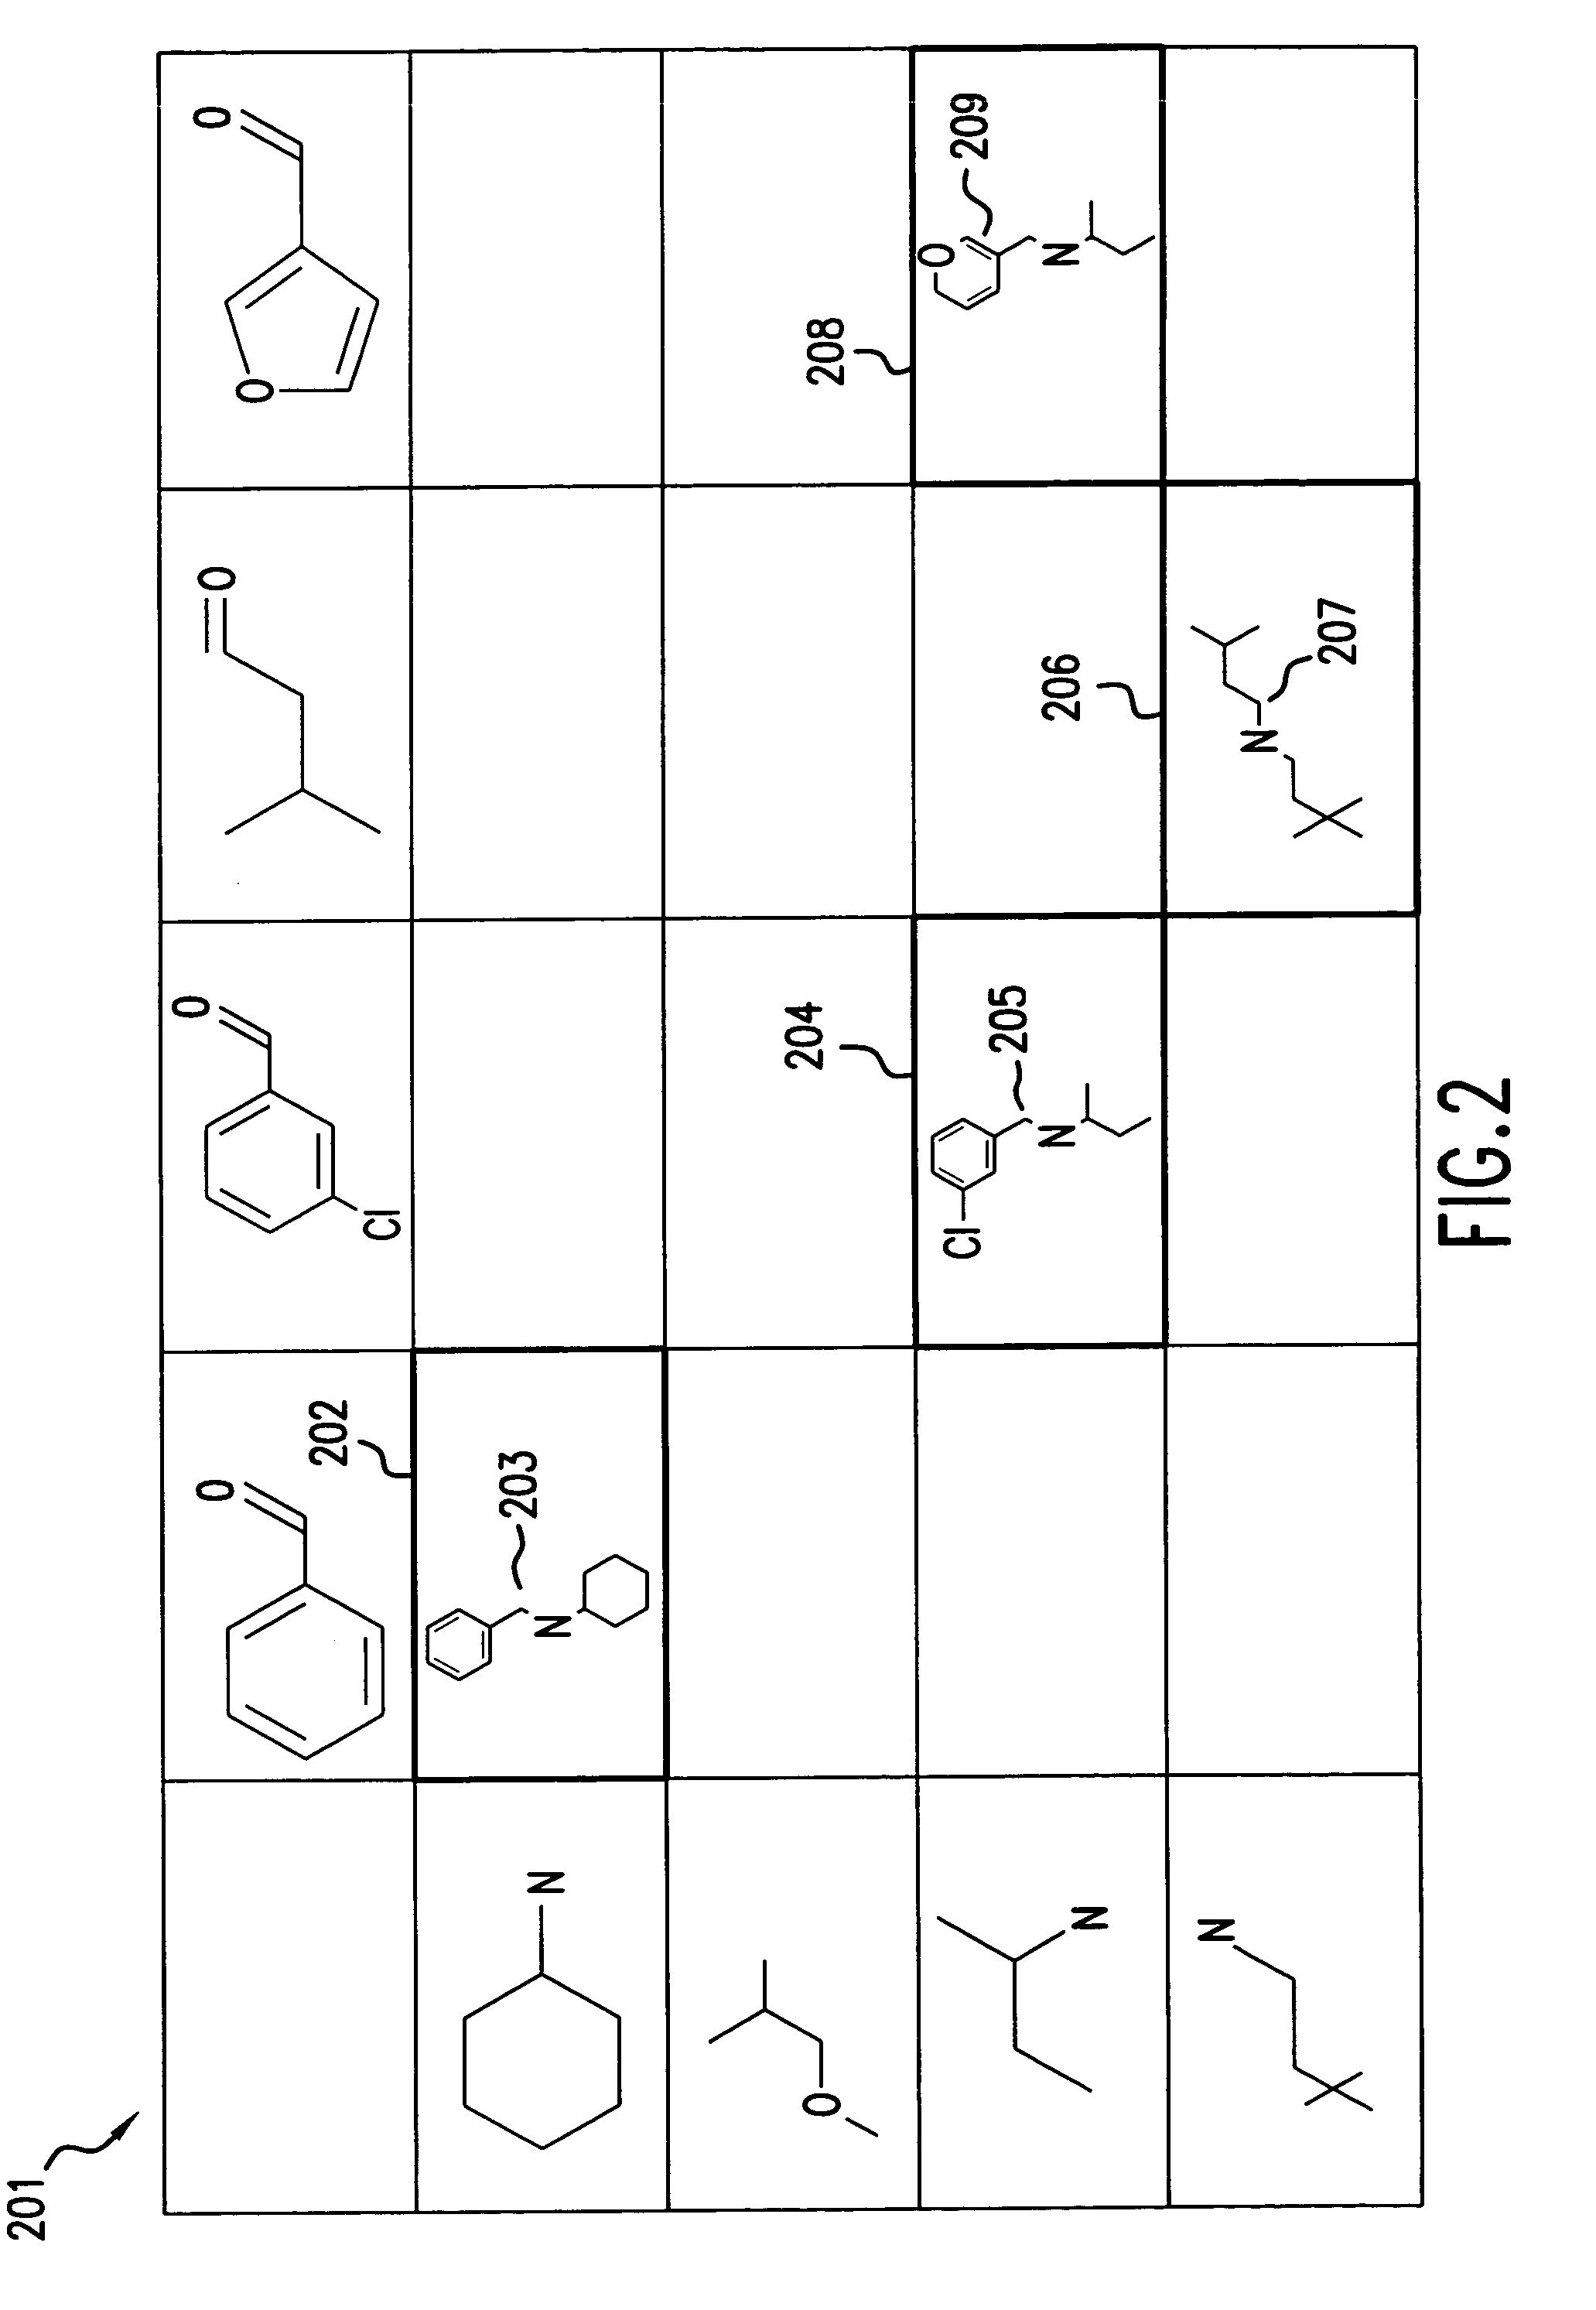 System, method and computer program product for fast and efficient searching of large chemical libraries